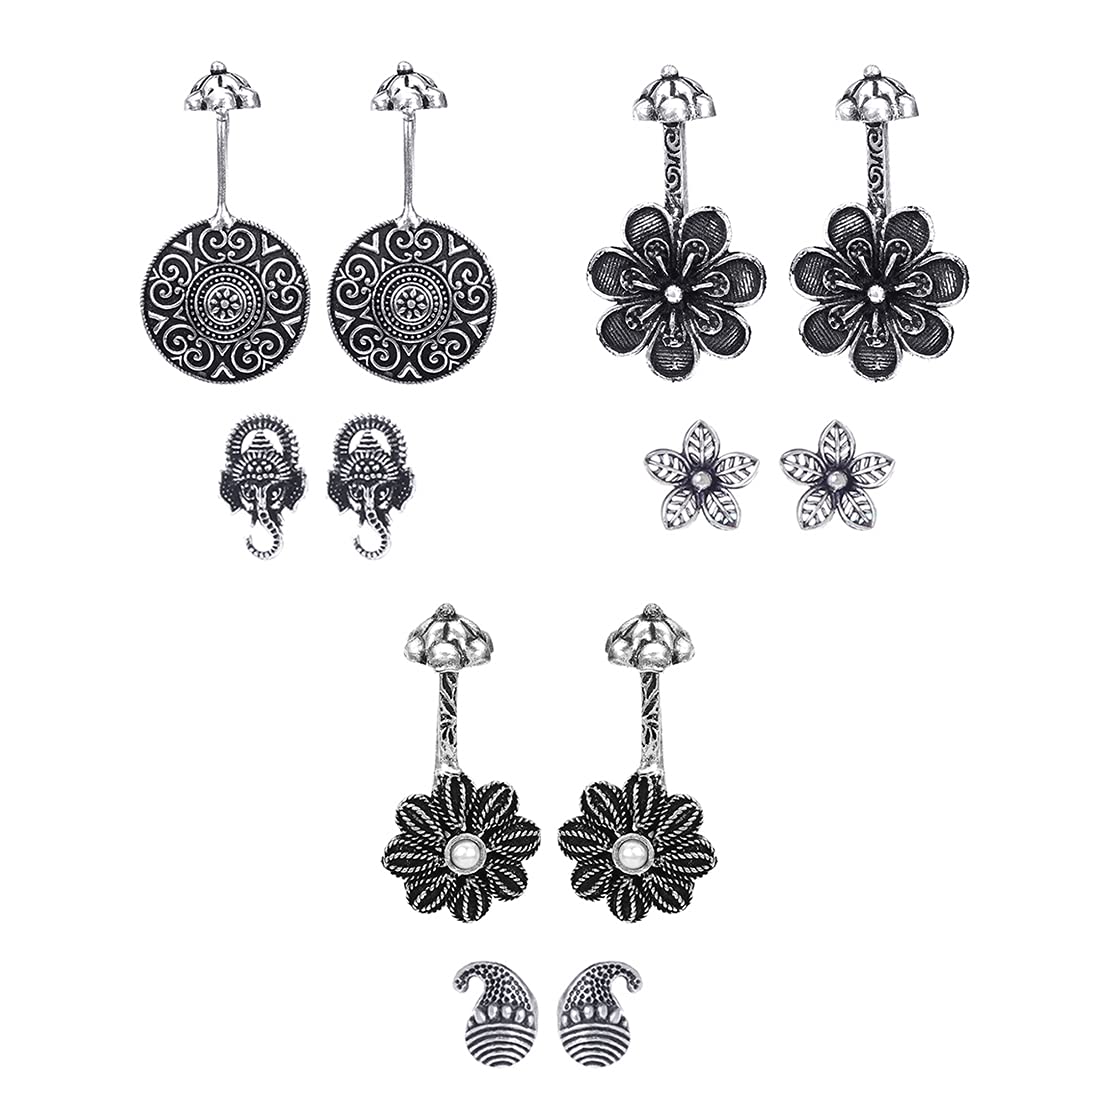 Yellow Chimes Oxidised Ear Cuffs for Women Combo of 3 Pairs Silver Oxidised Stud Earrings Floral Design Traditional Bugadi Ear Clip Earrings for Women and Girls.